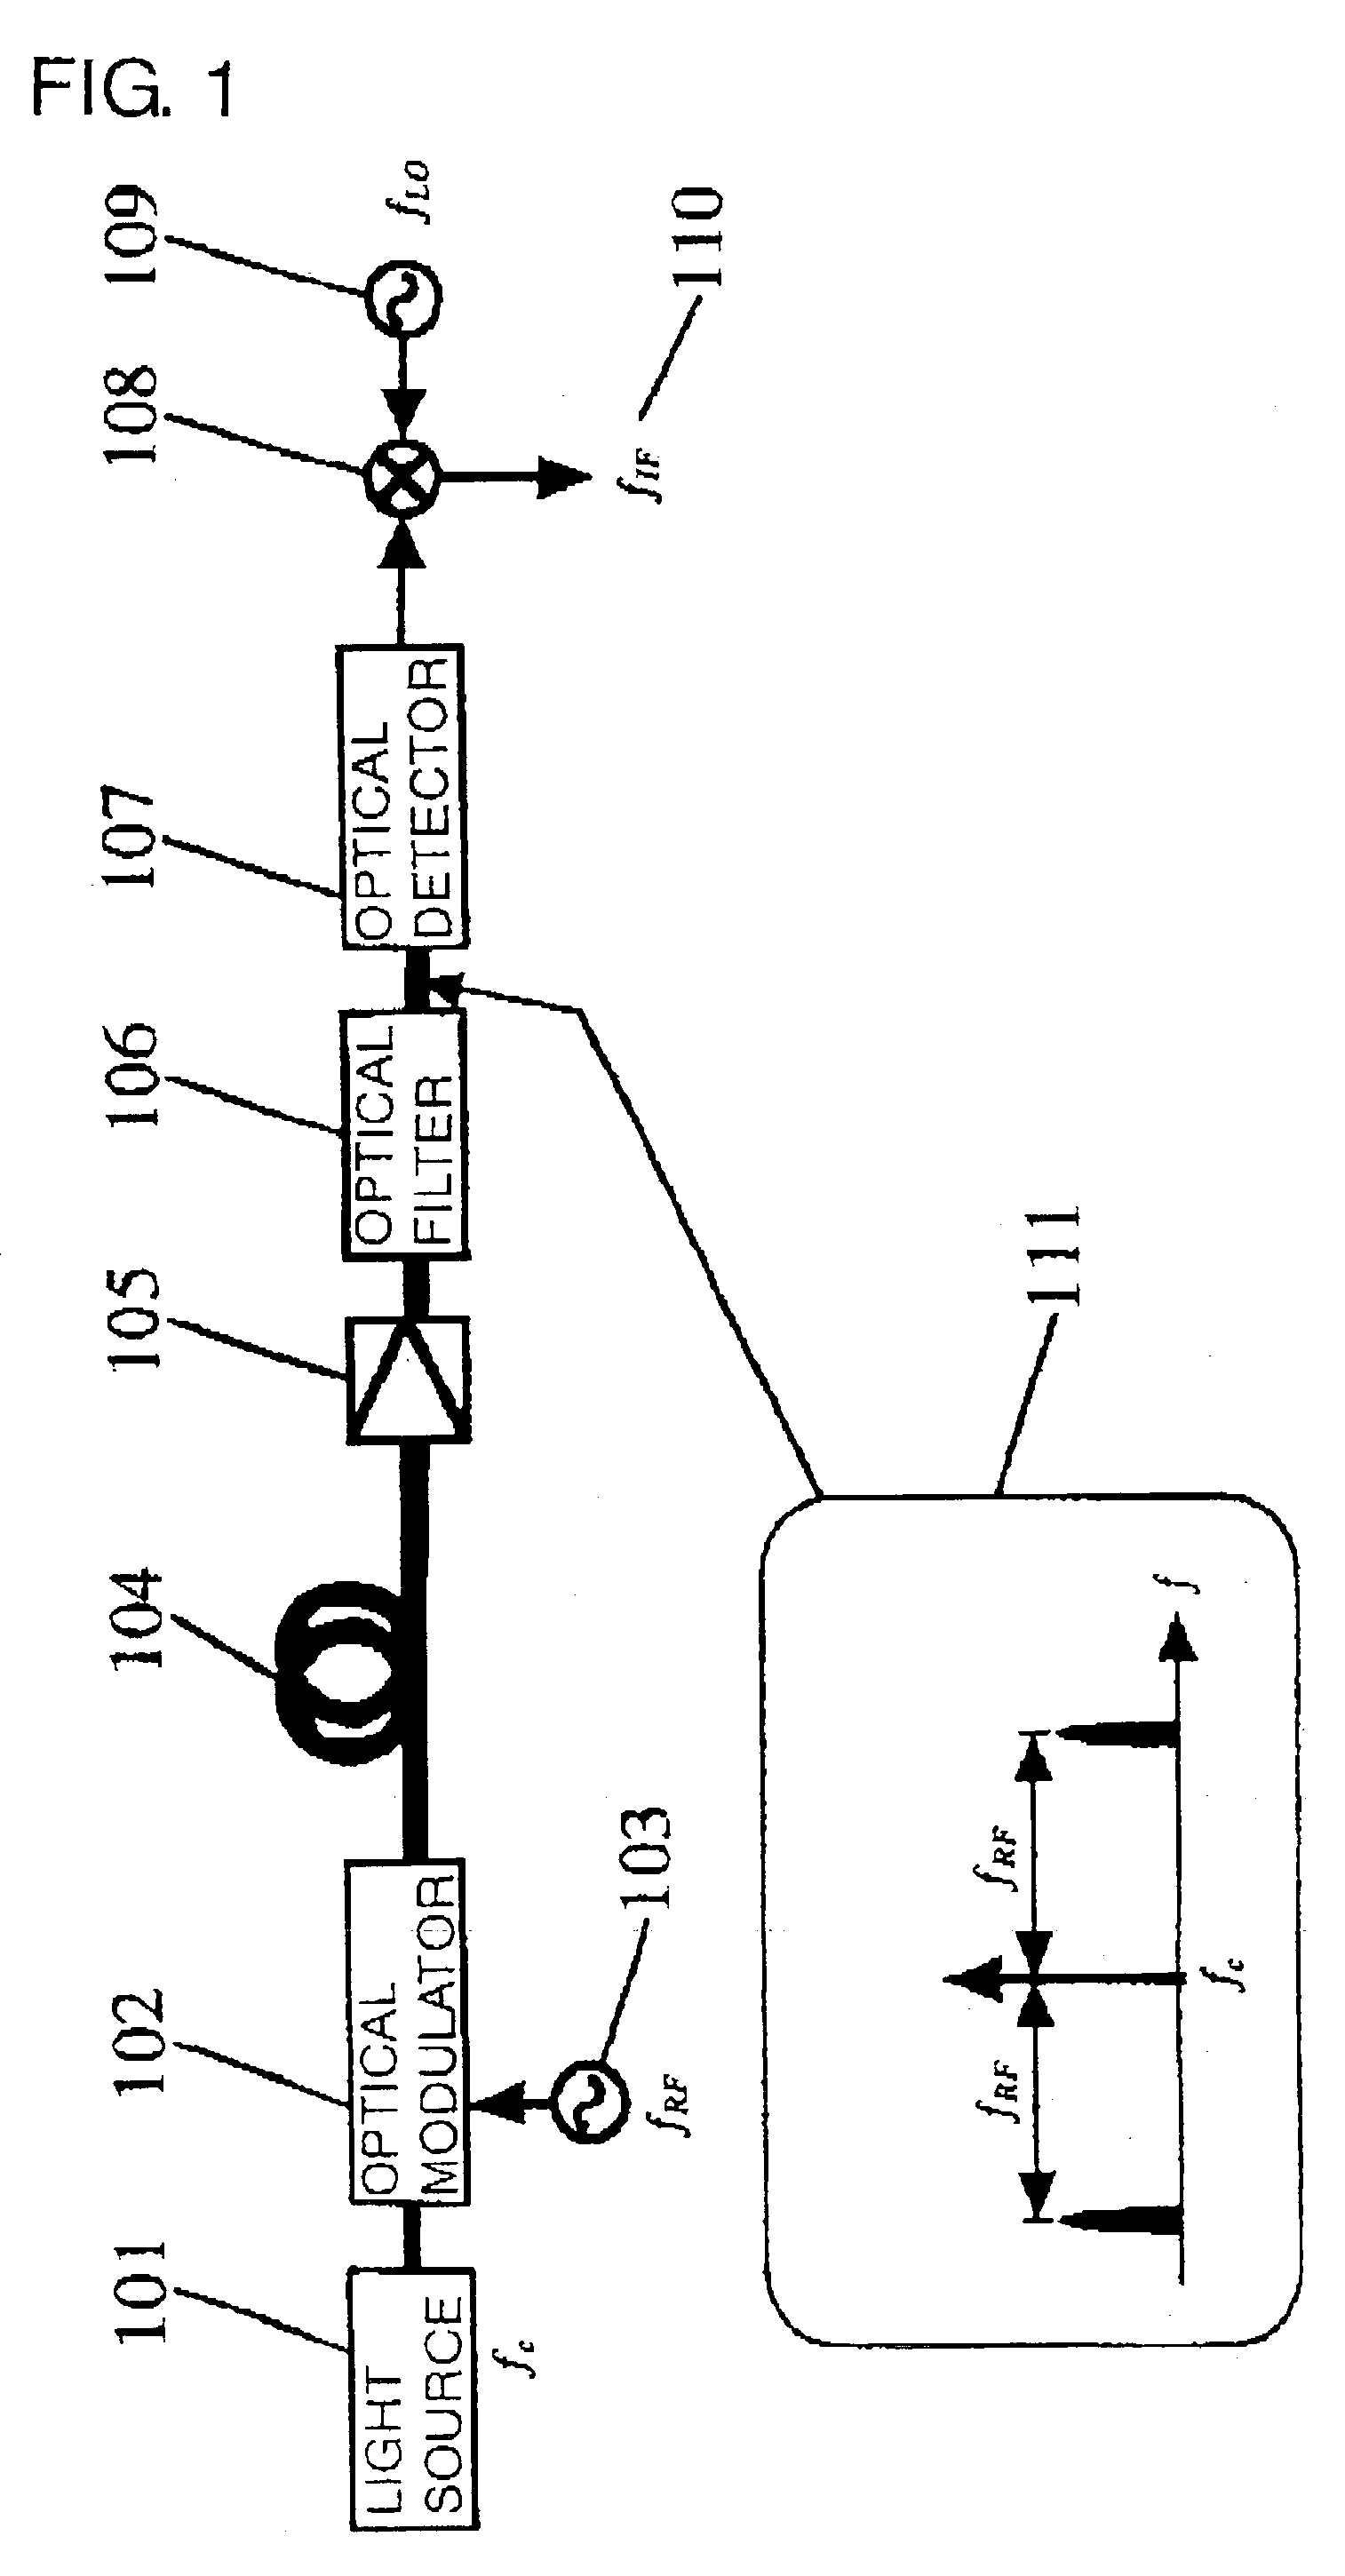 Modulated light signal processing method and apparatus